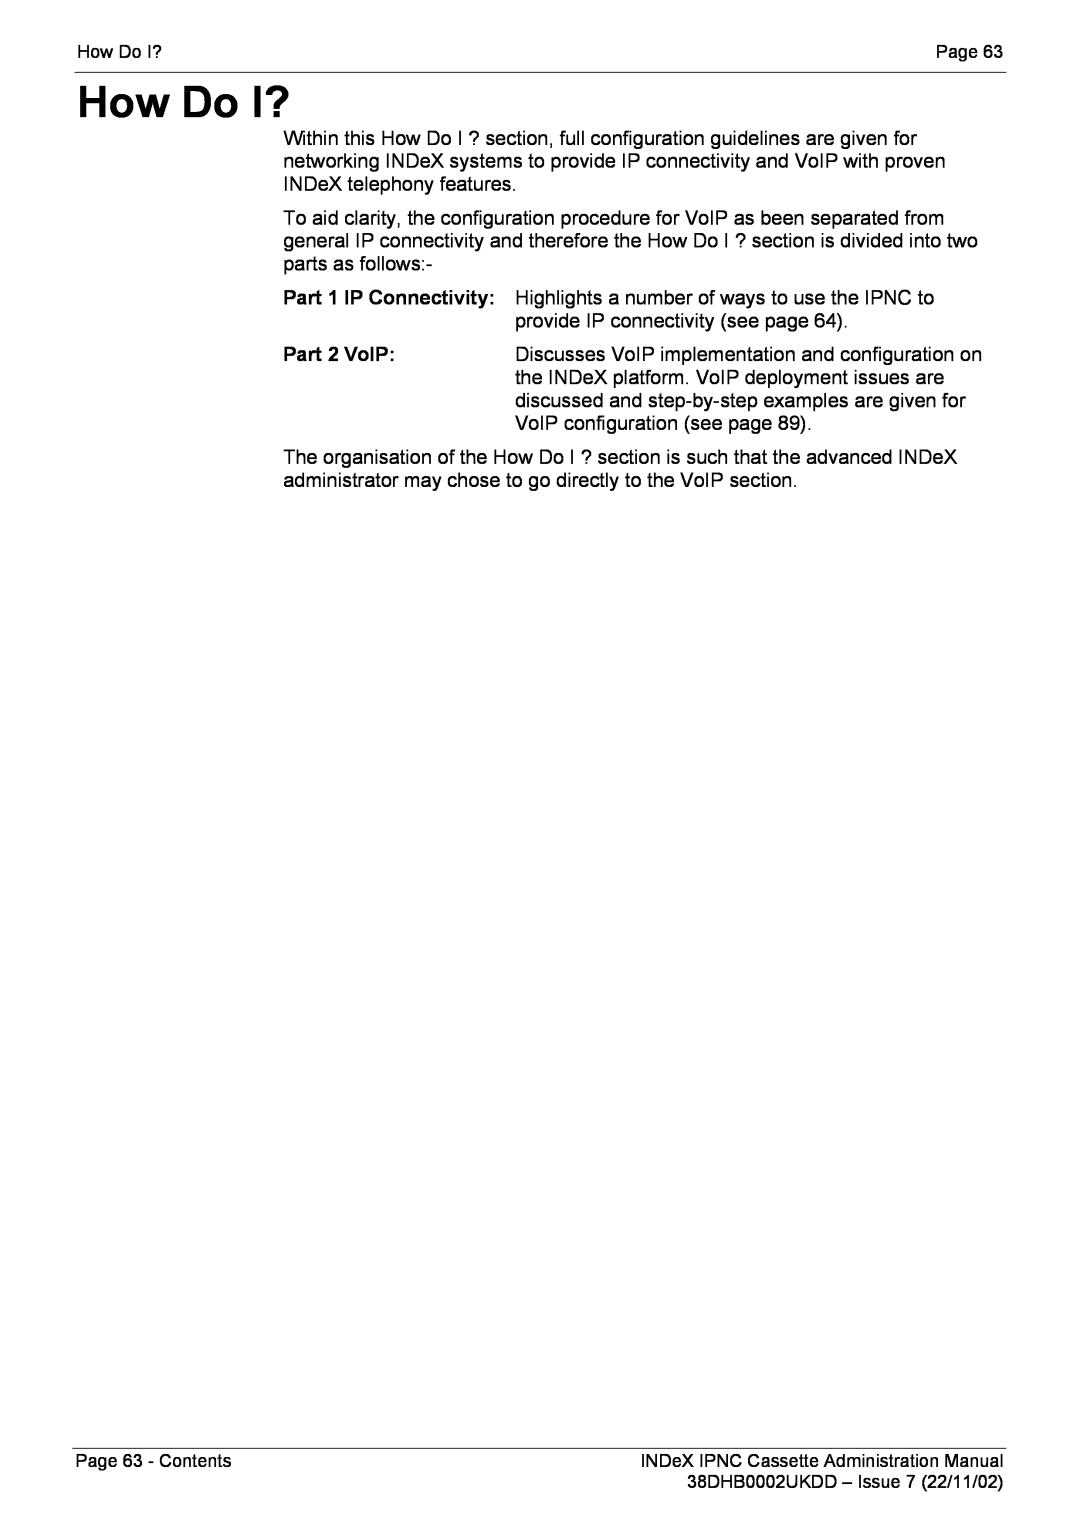 Avaya 38DHB0002UKDD manual How Do I?, Page 63 - Contents, INDeX IPNC Cassette Administration Manual 